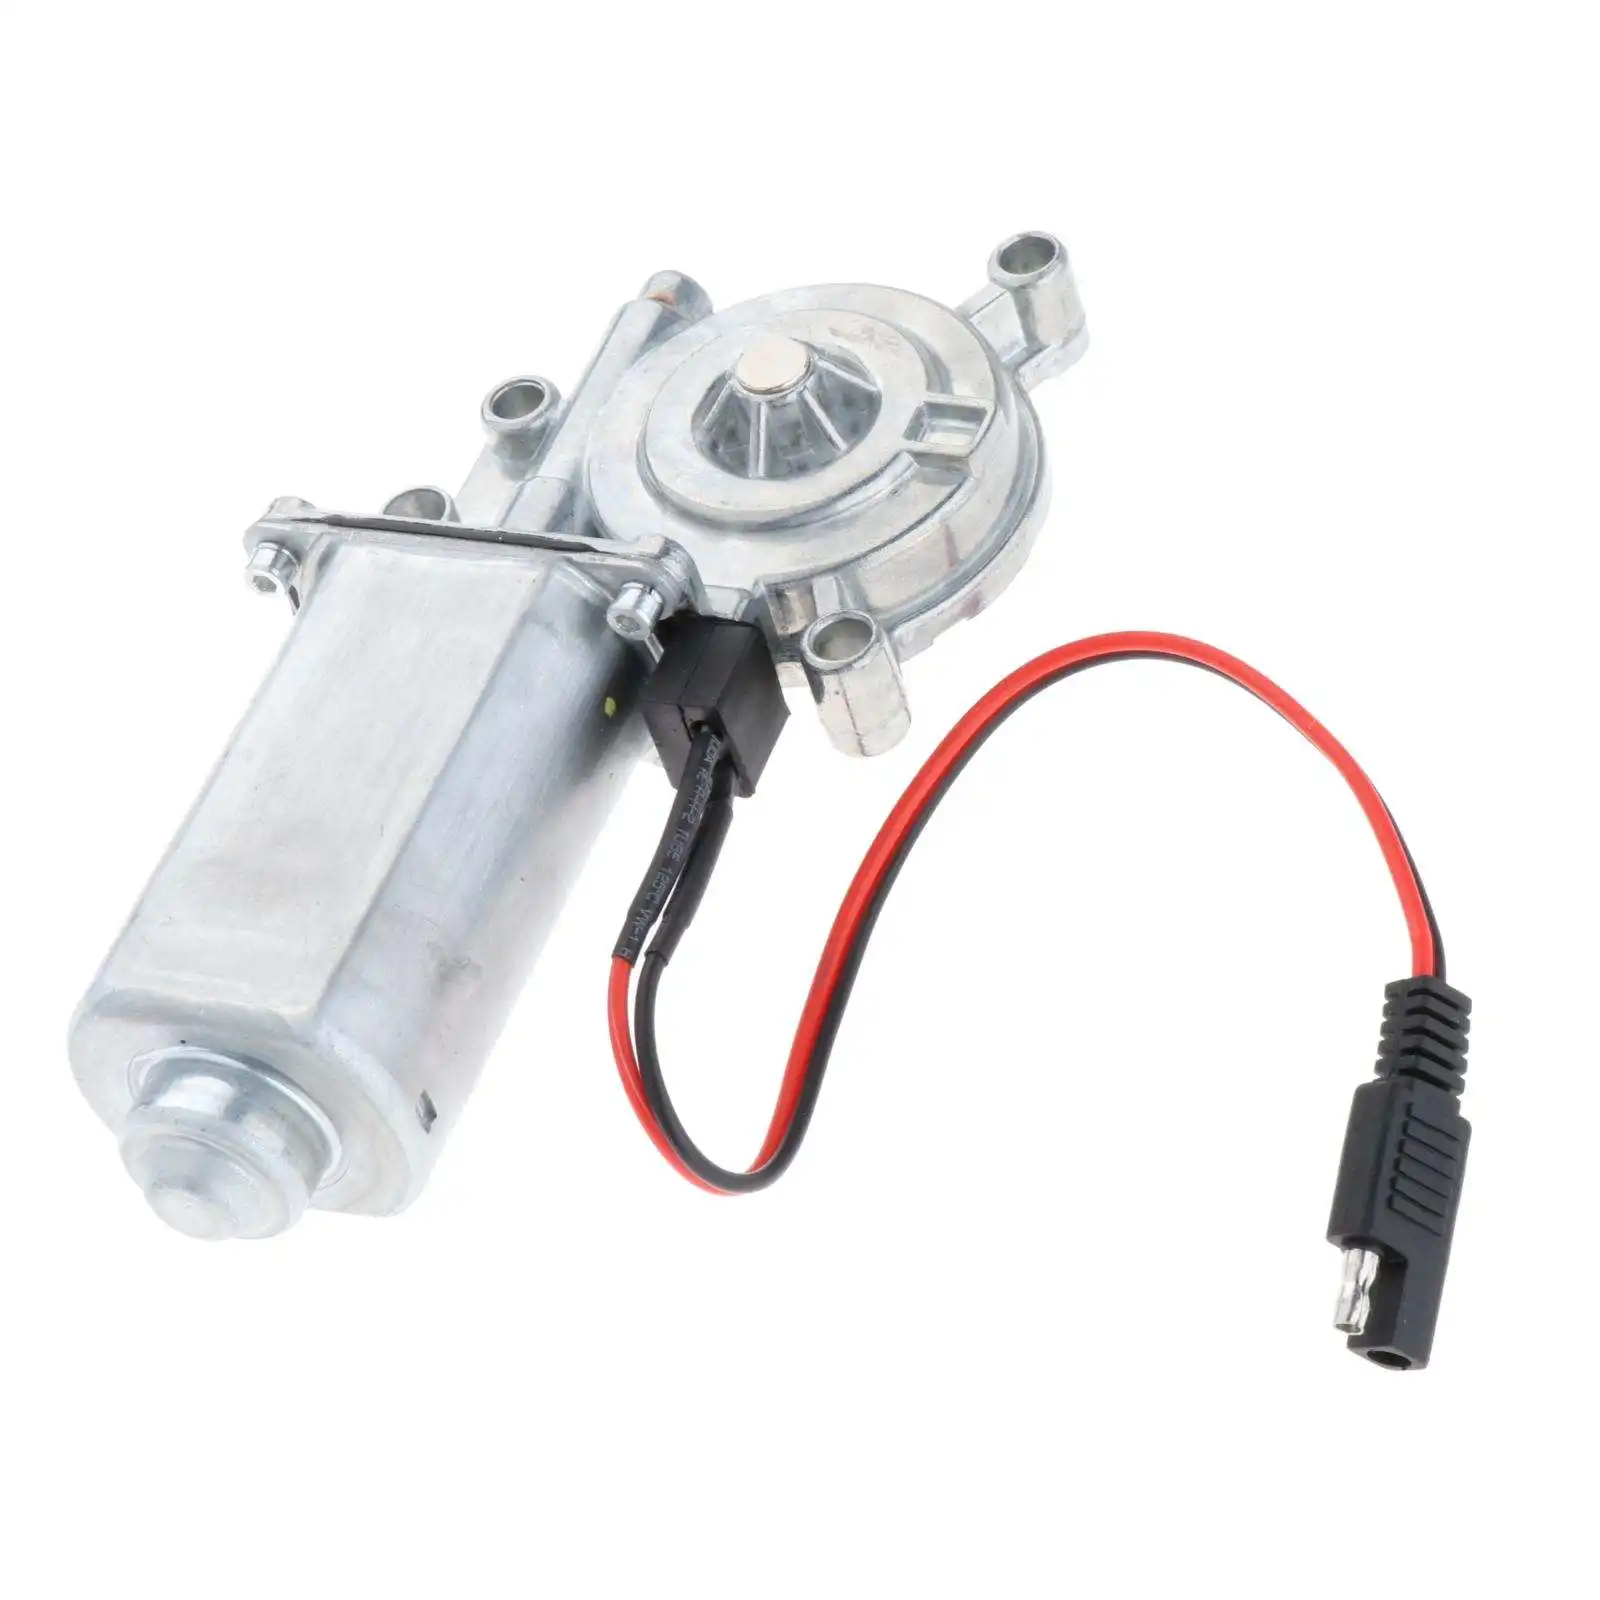 RV Power Awning Motor 266149 Replacement 75-Rpm Fit for Venture Durable Accessories